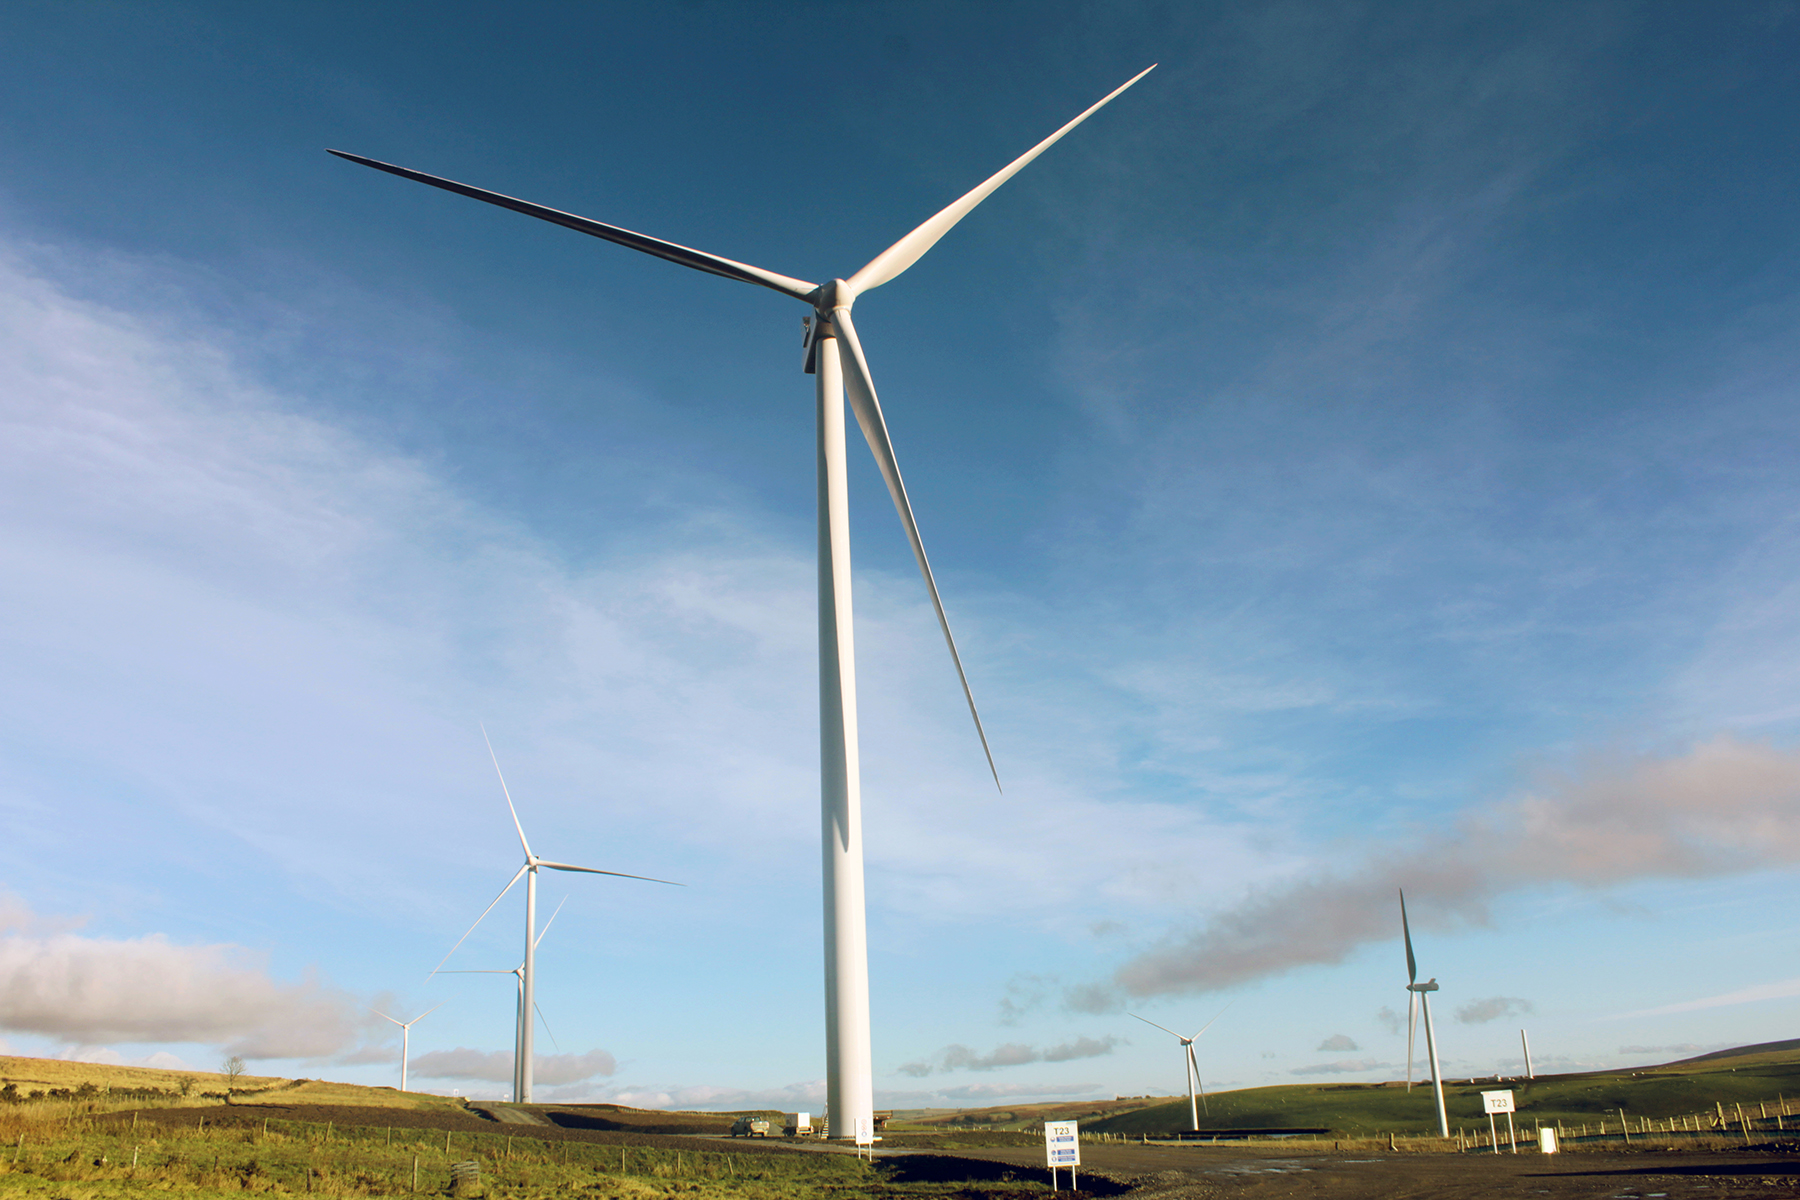 The wind farm will be capable of providing renewable electricity to meet the average needs of more than 26,000 homes.